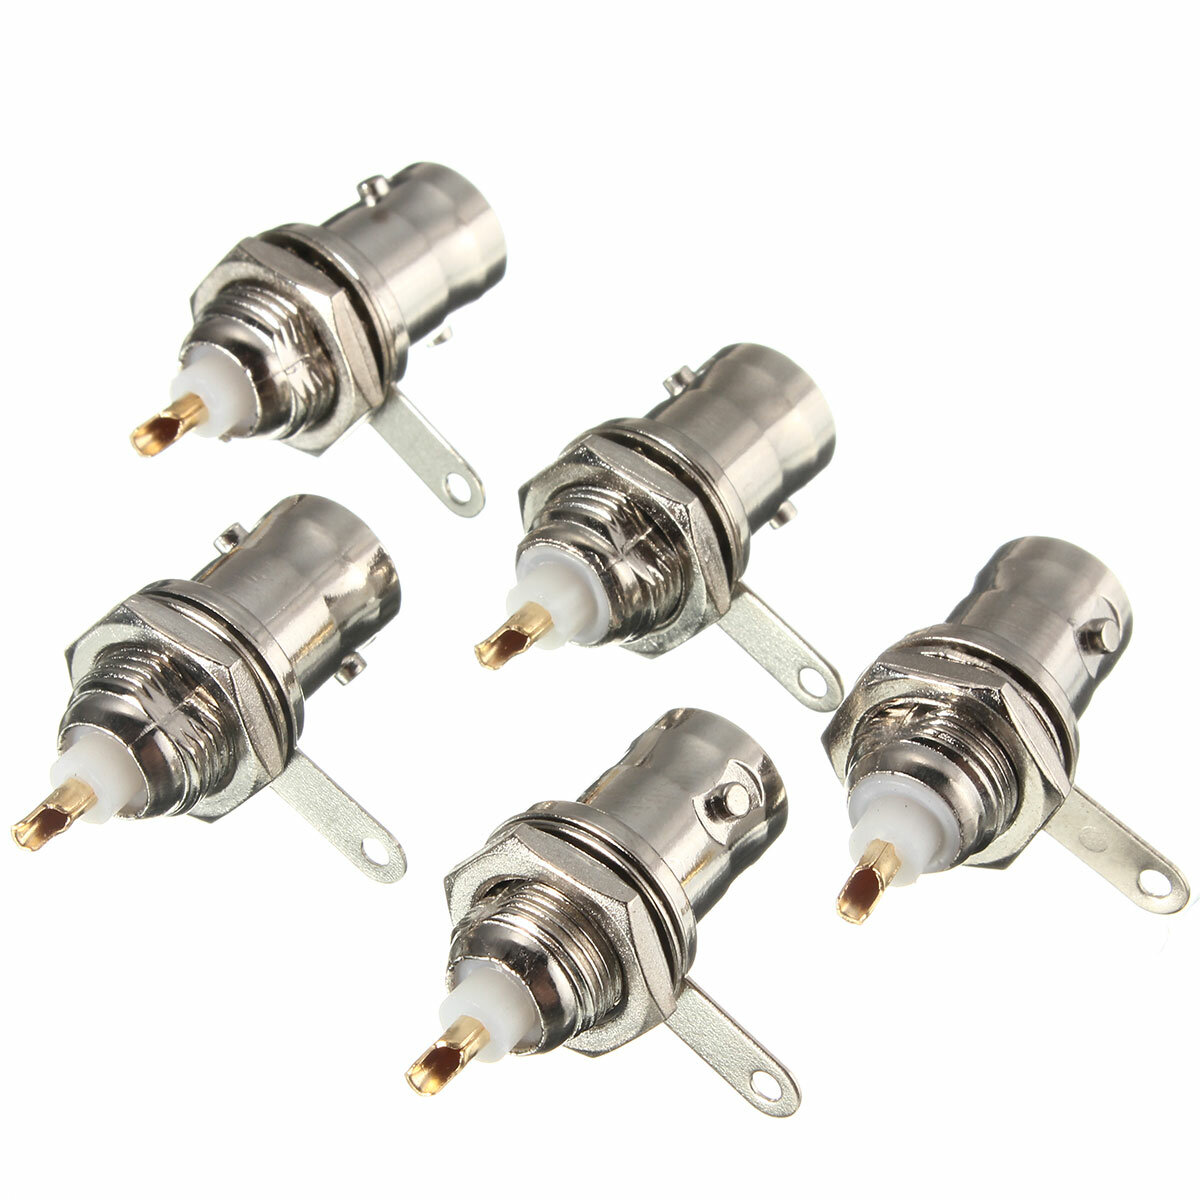 5pcs BNC Female Socket Solder Connector voor Chassis Panel Mount Coaxiale Kabel